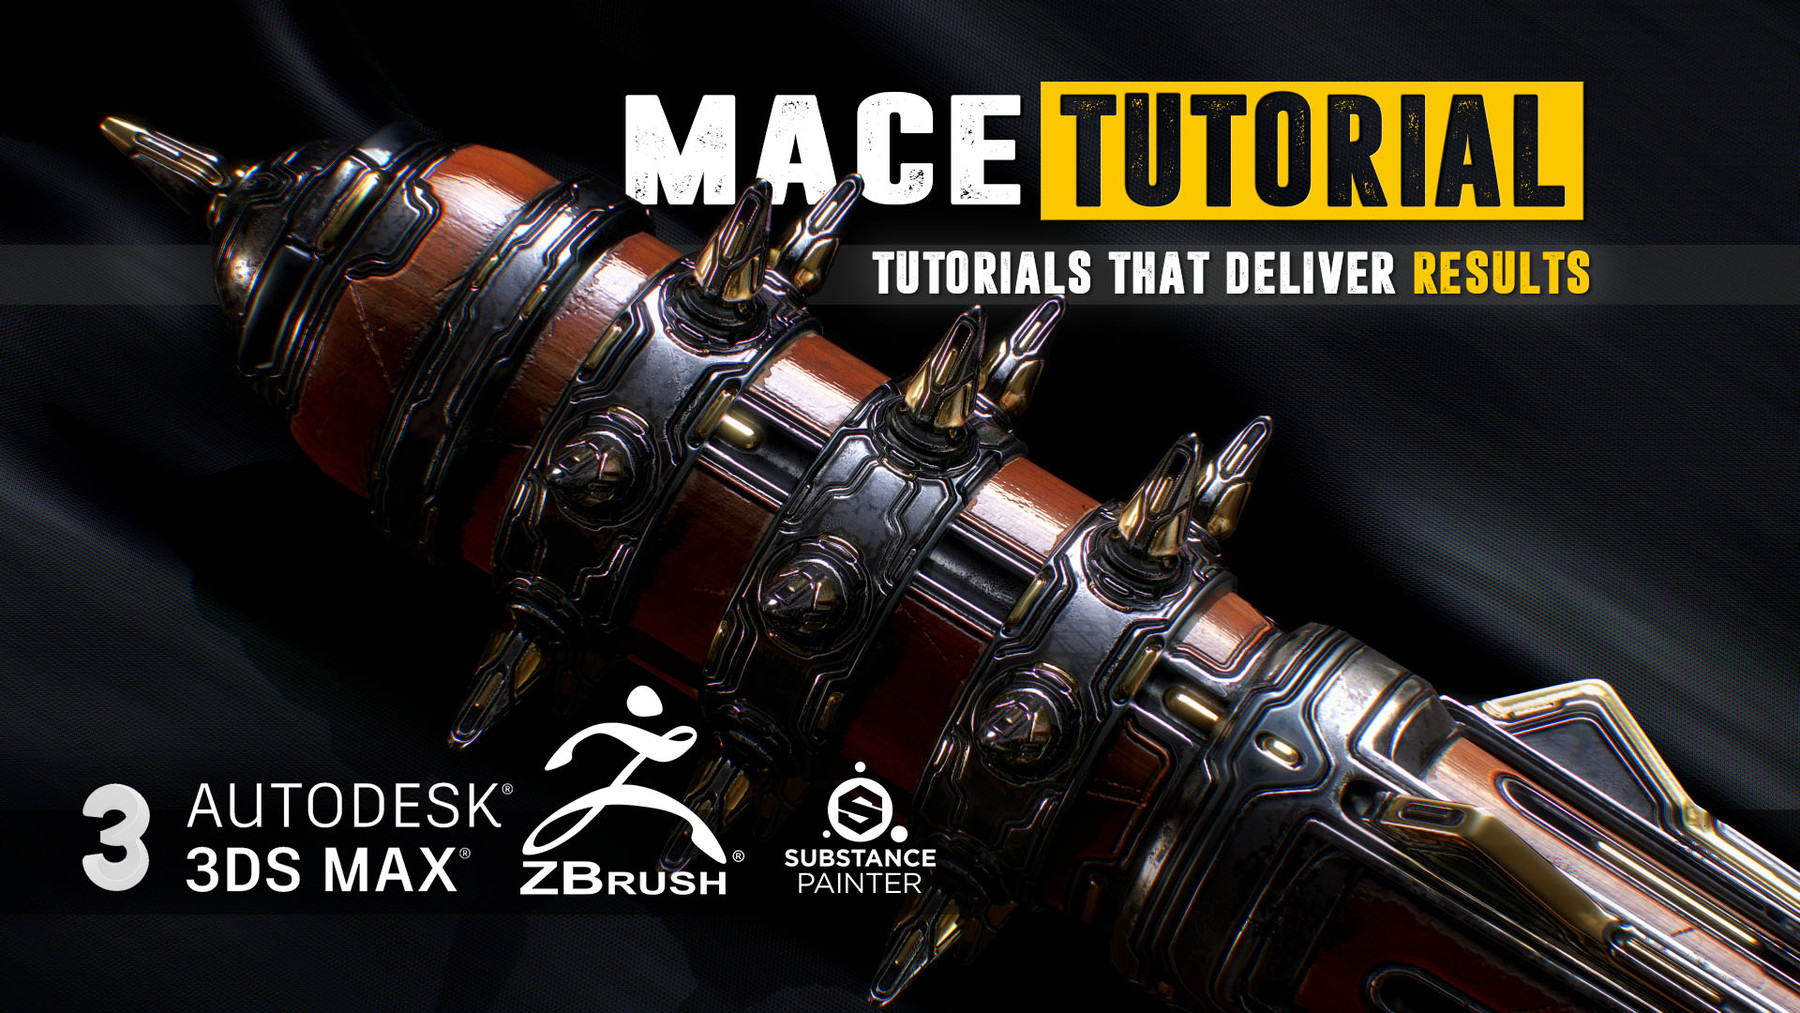 grundigt korrekt grill ChamferZone - MACE Tutorial - COMPLETE EDITION - Master the art of Zbrush, 3Ds  Max and Substance Painter